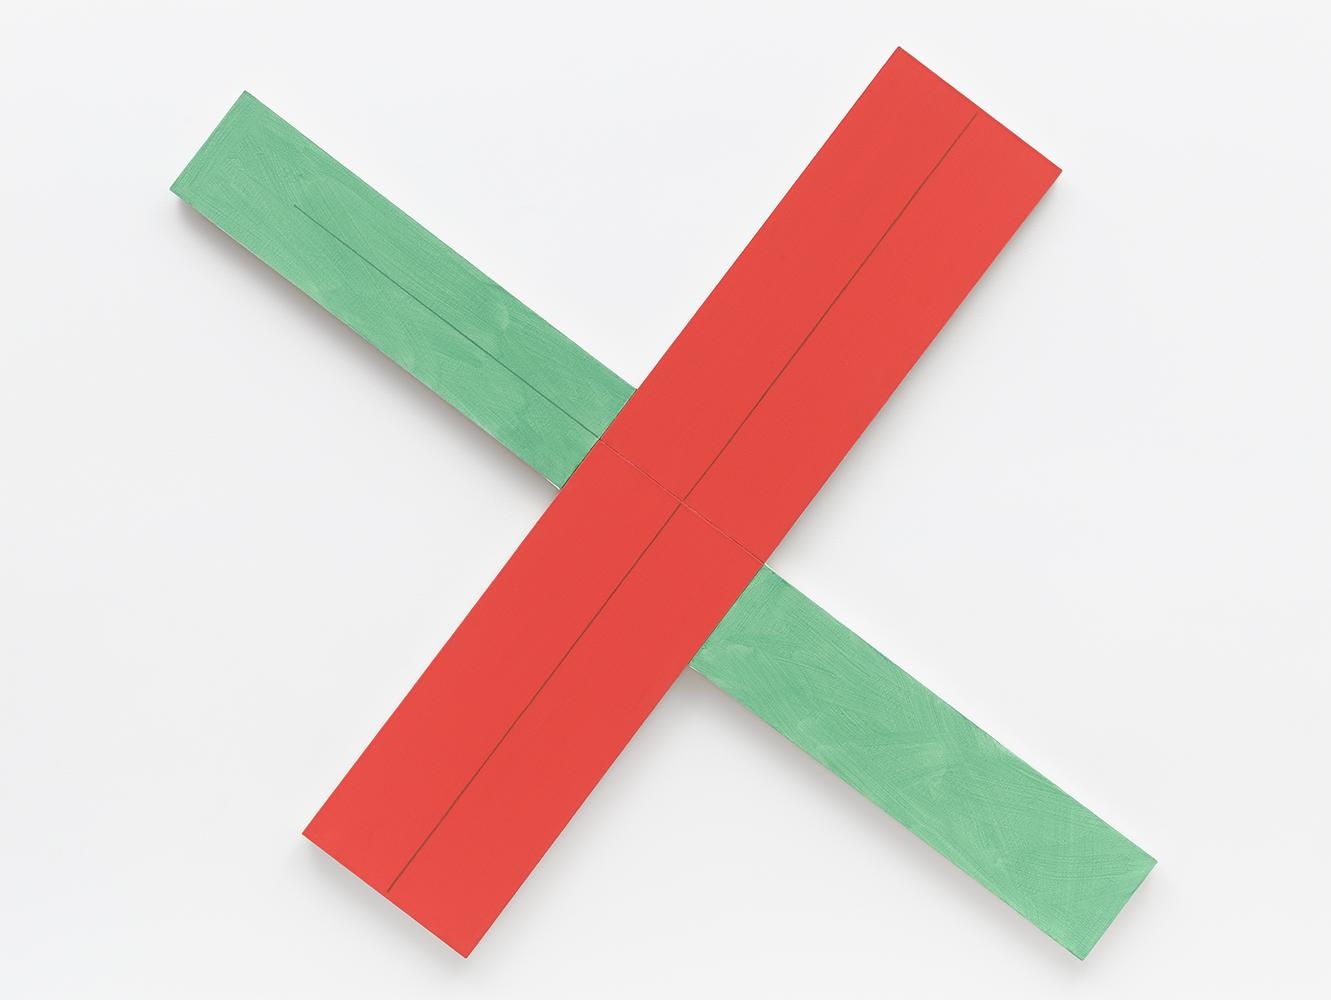 Robert Mangold
Red/Green X Within X #2
1982
acrylic and black pencil on canvas
67 x 75 inches (170.2 x 190.5 cm)